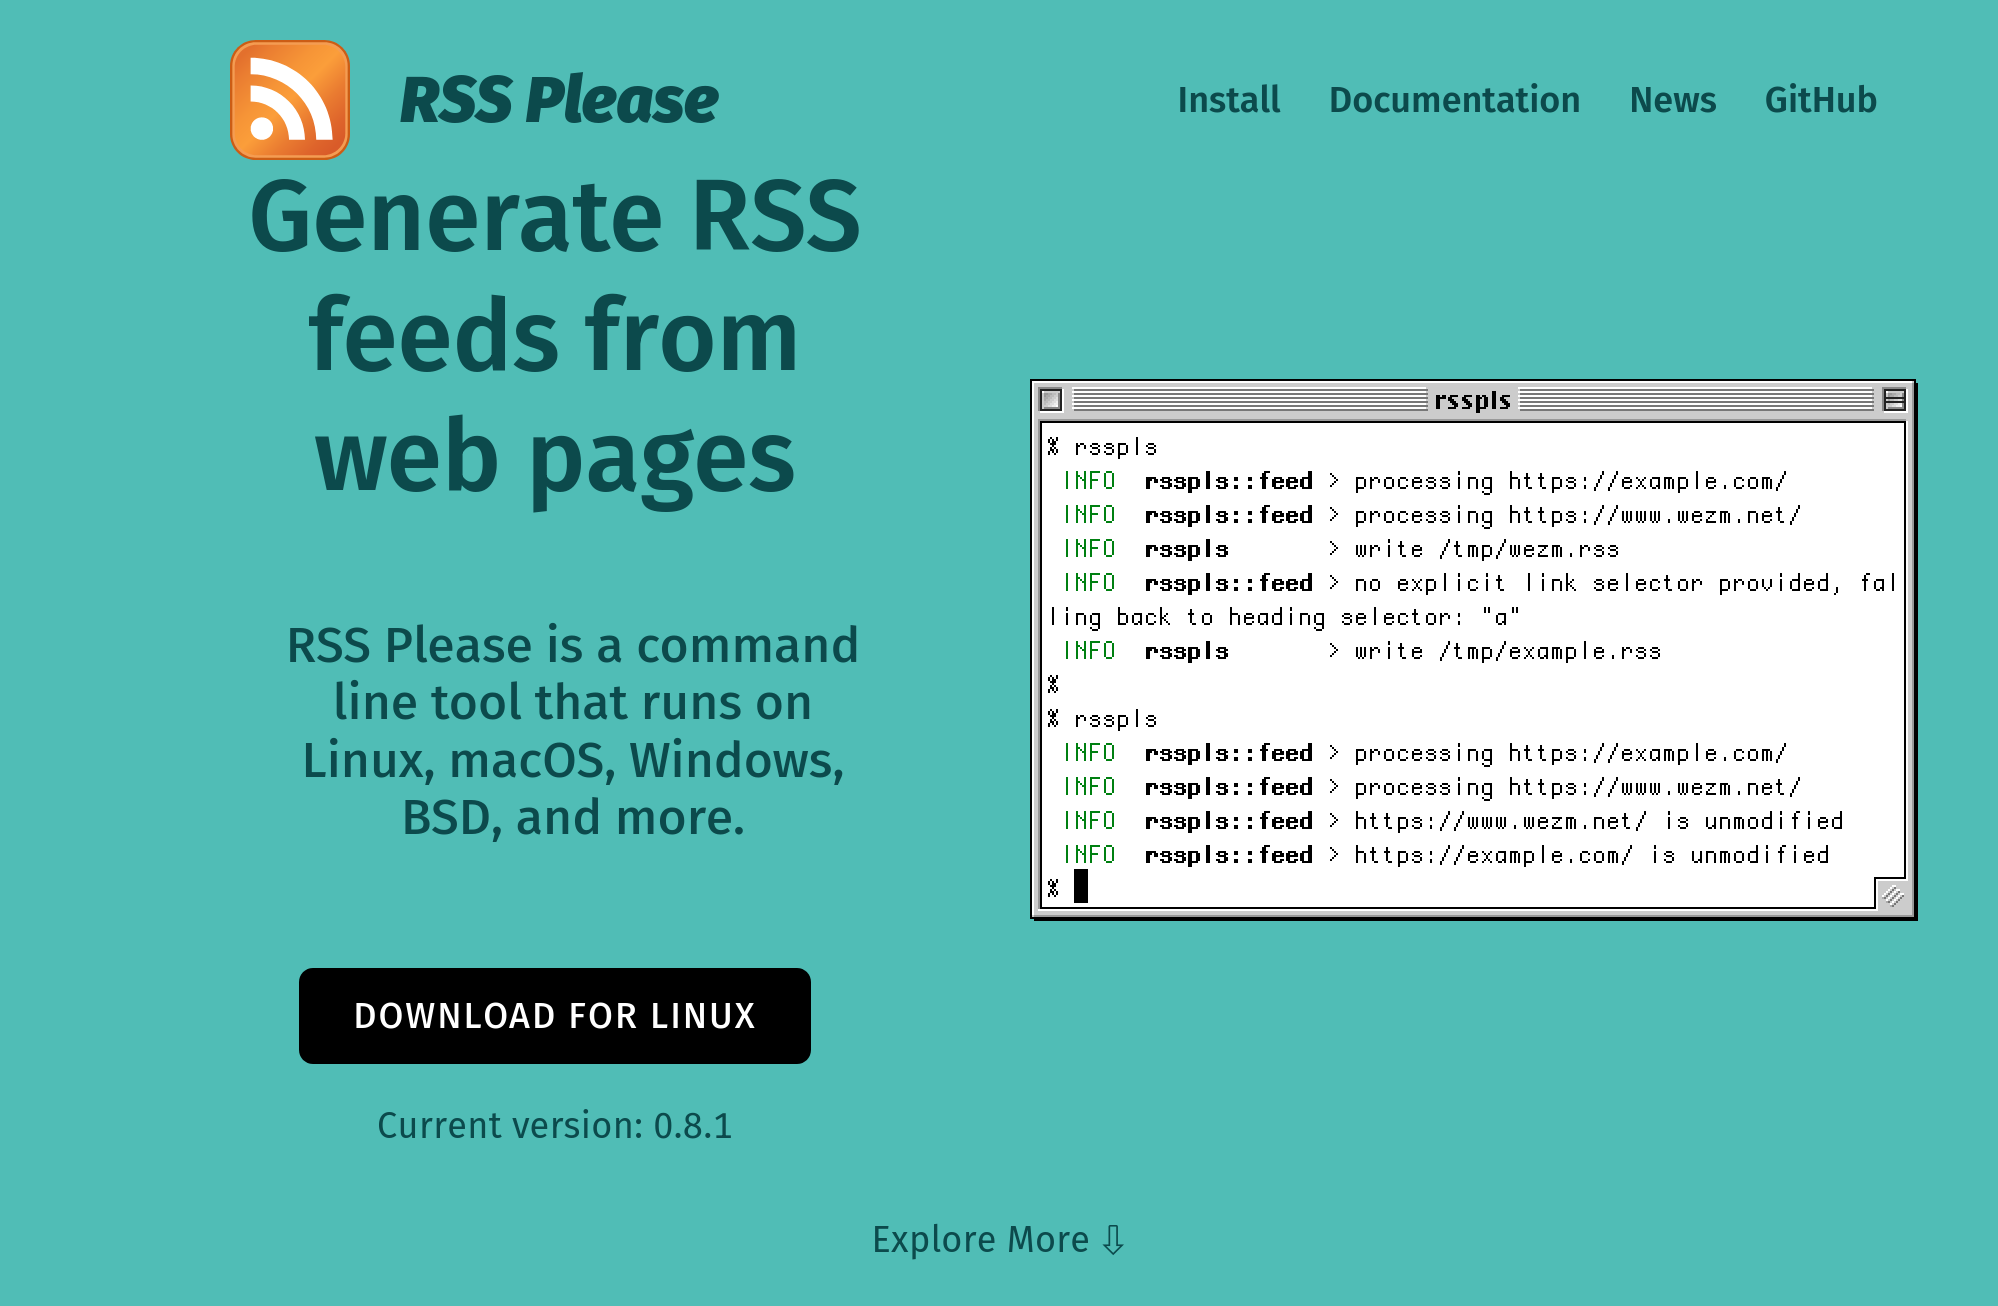 Screenshot of the RSS Please website. It has a teal backgound and features a screenshot of the tool running in a terminal. There is an orange RSS logo in the top left and download button in the bottom left.